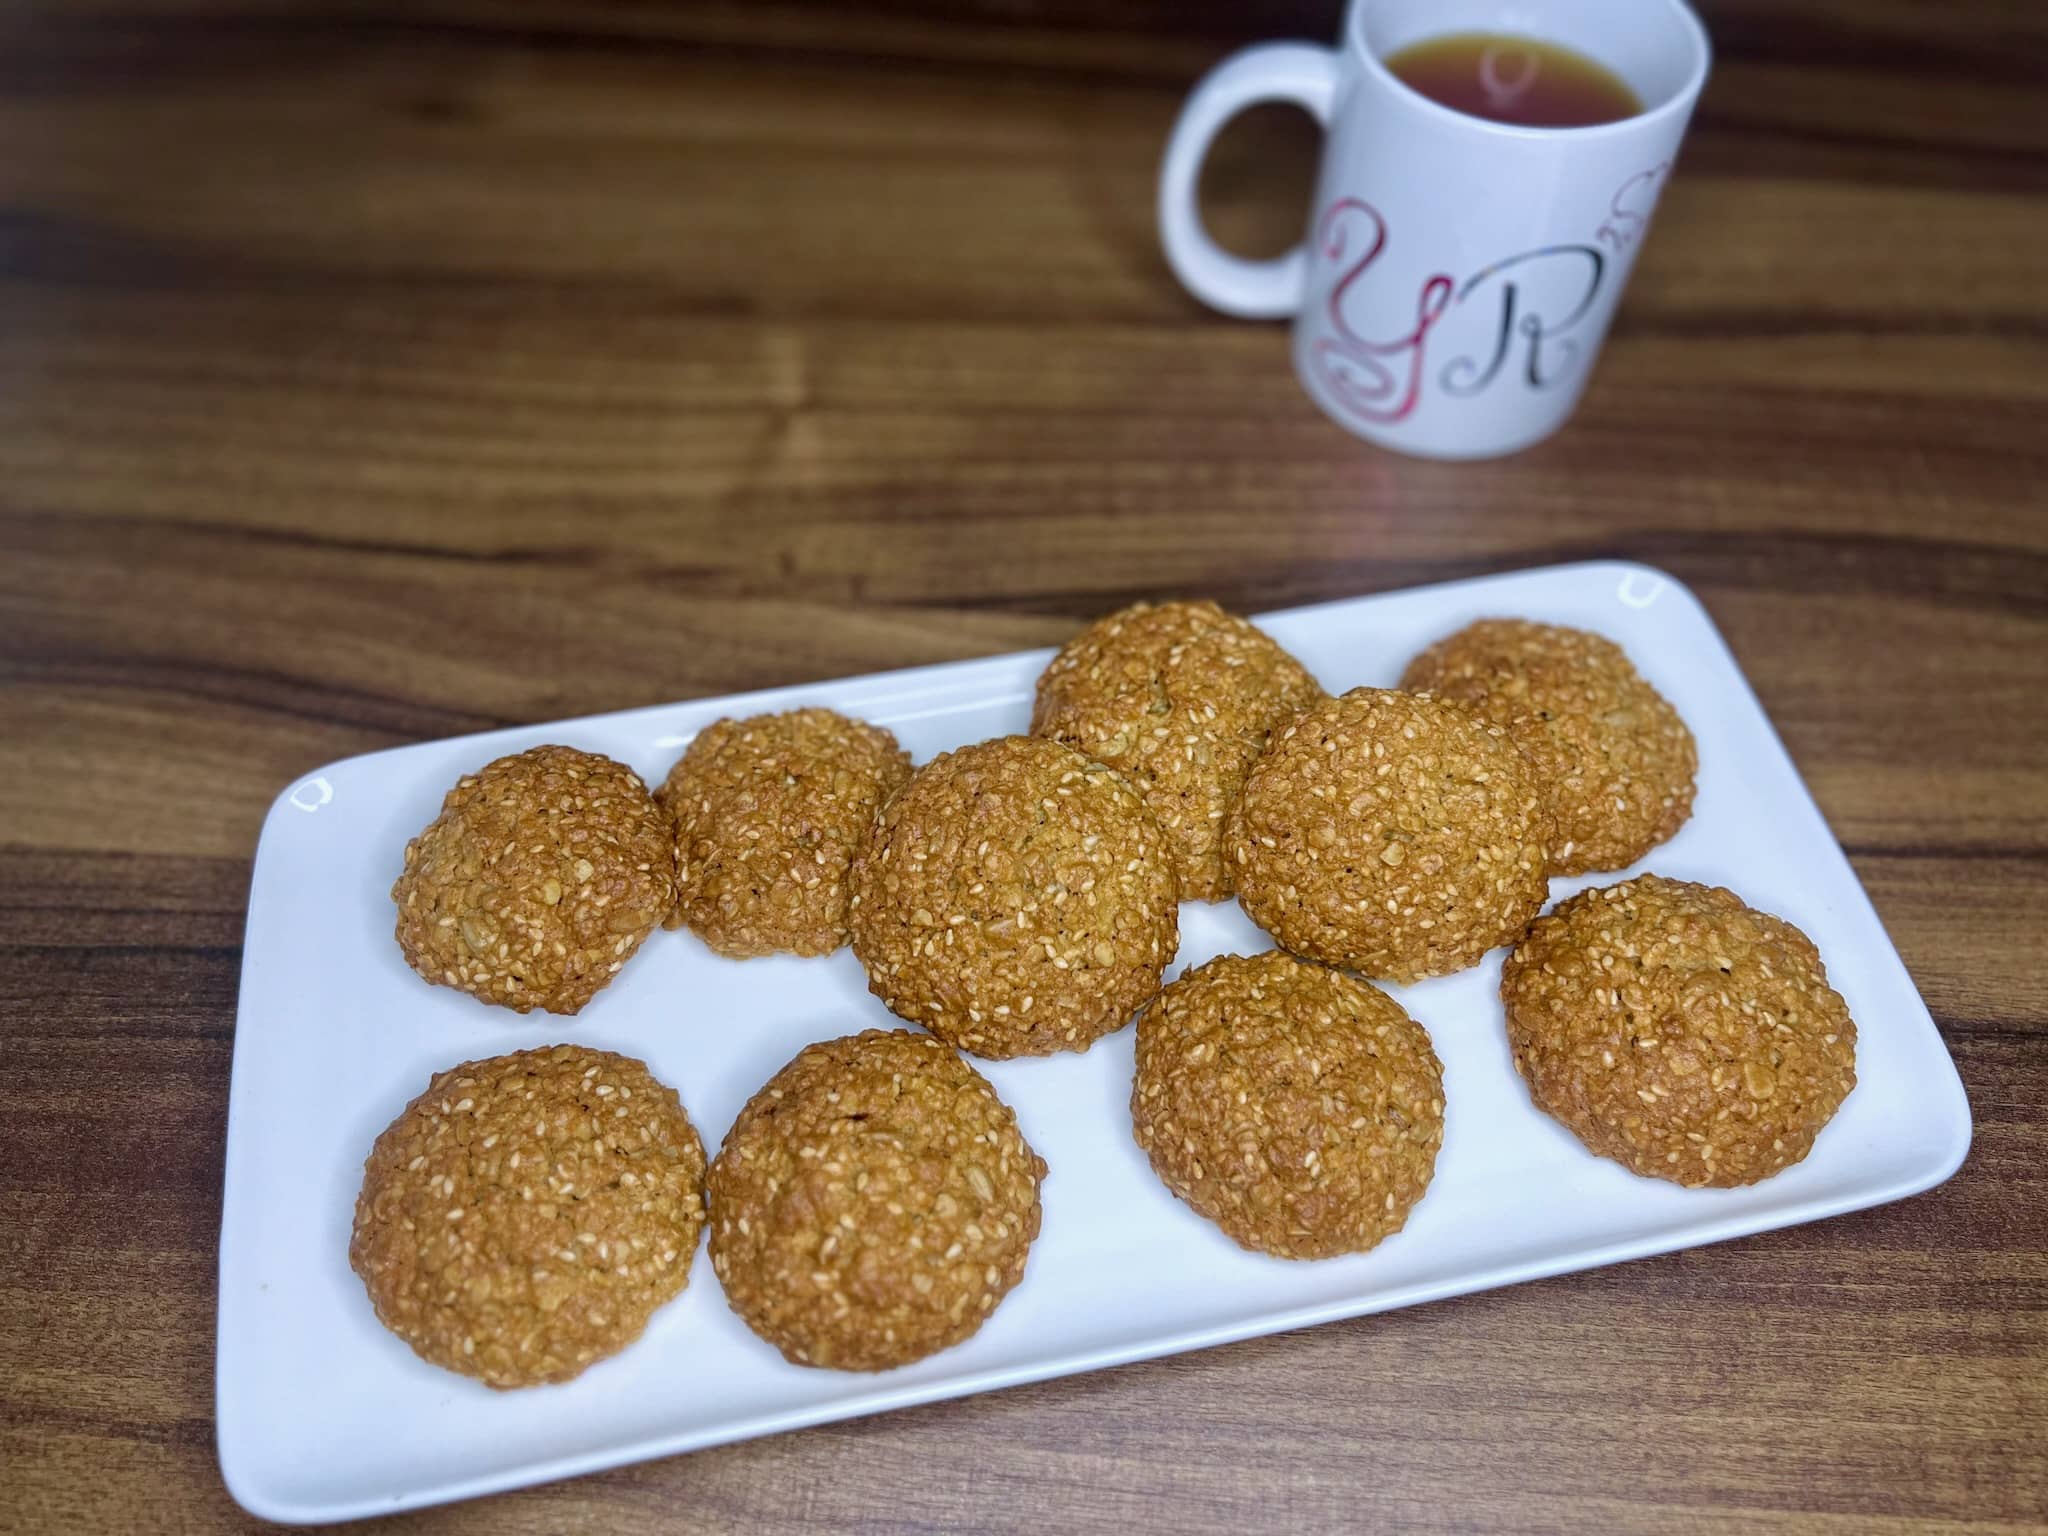 Nicely baked Just Perfect Seeded Oat Cookies on a plate with a mug of tea on a side